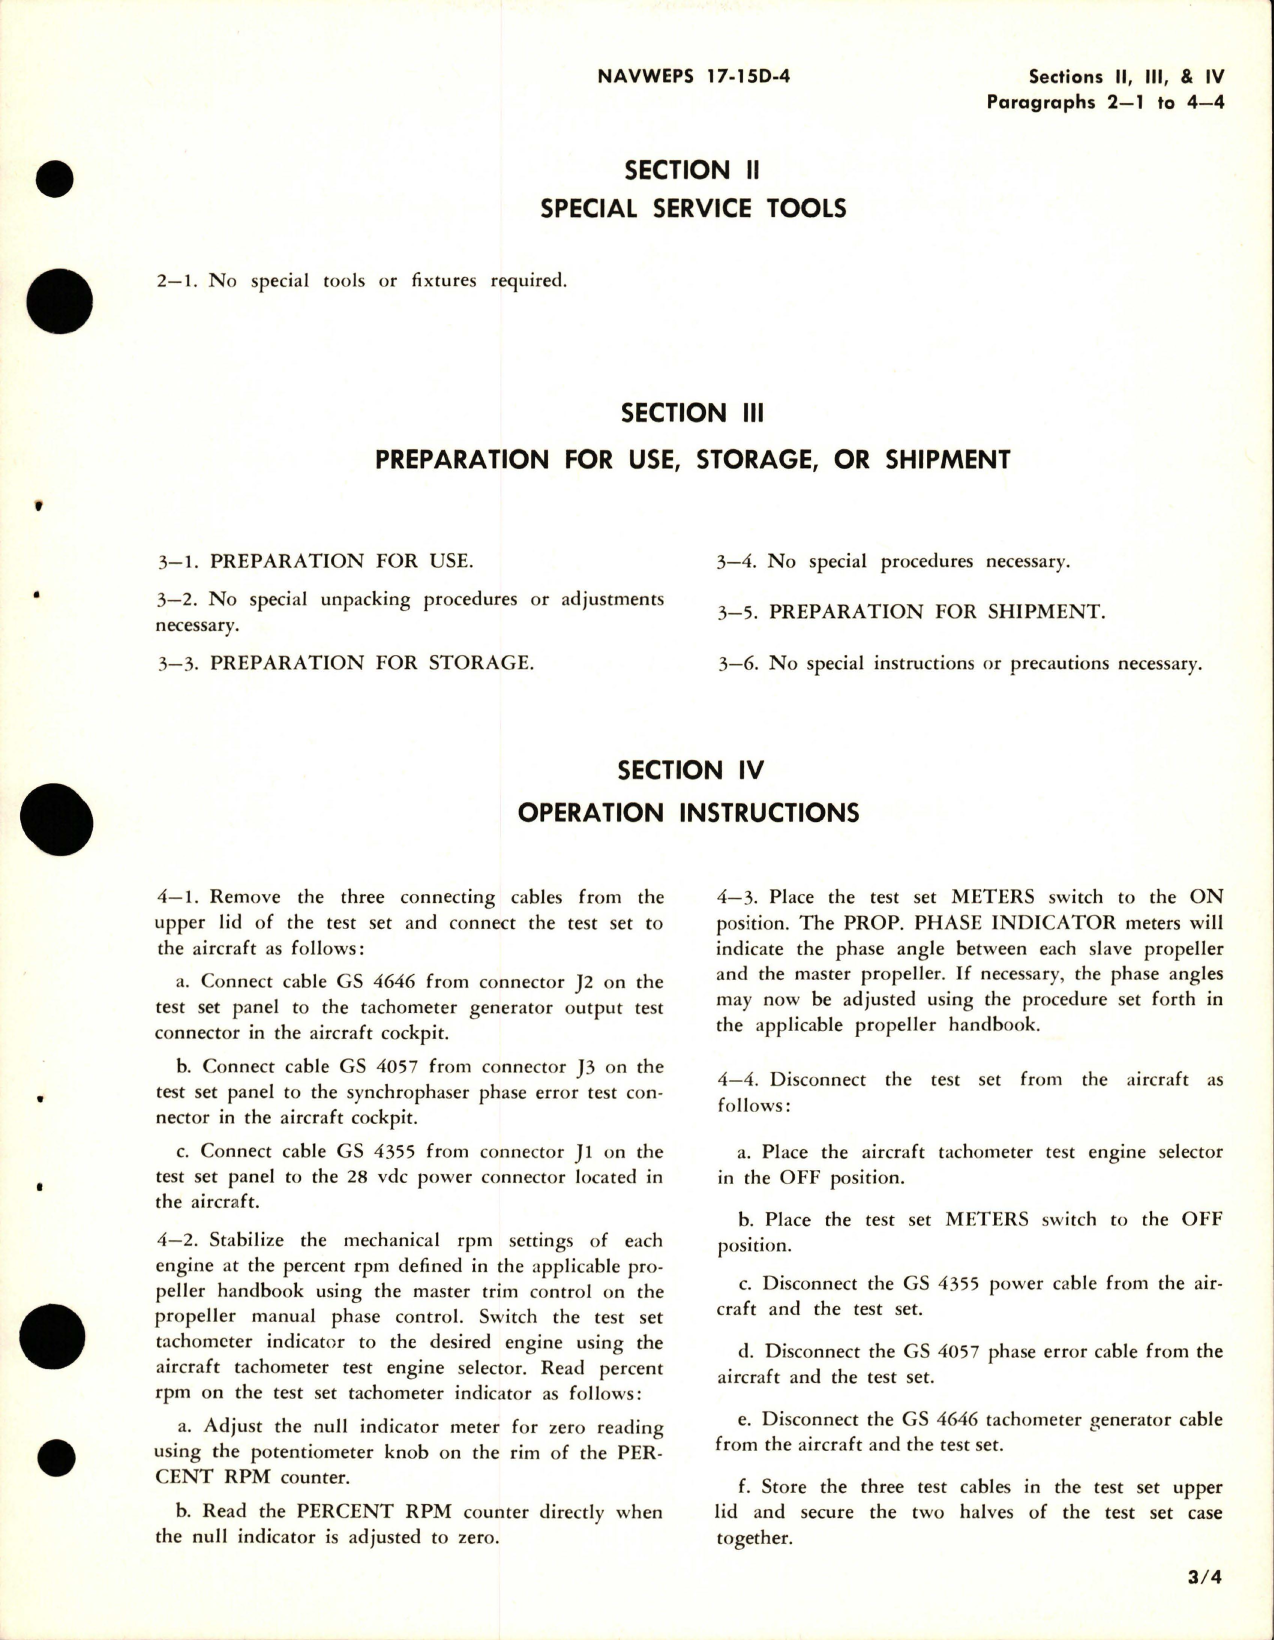 Sample page 7 from AirCorps Library document: Operation, Service Instructions with Parts for RPM and Phase Indicator Test Set - GS3940